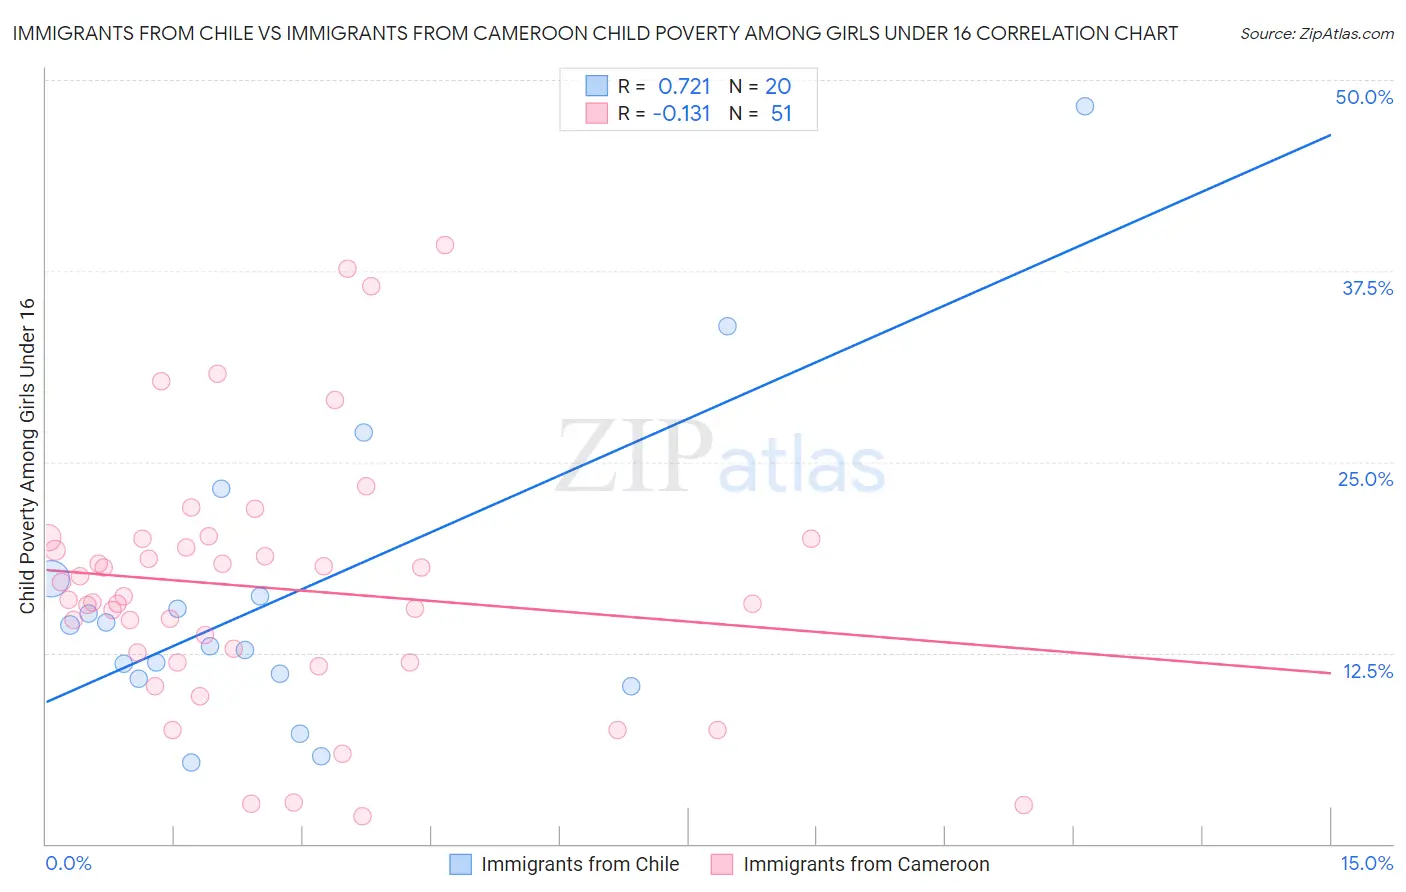 Immigrants from Chile vs Immigrants from Cameroon Child Poverty Among Girls Under 16